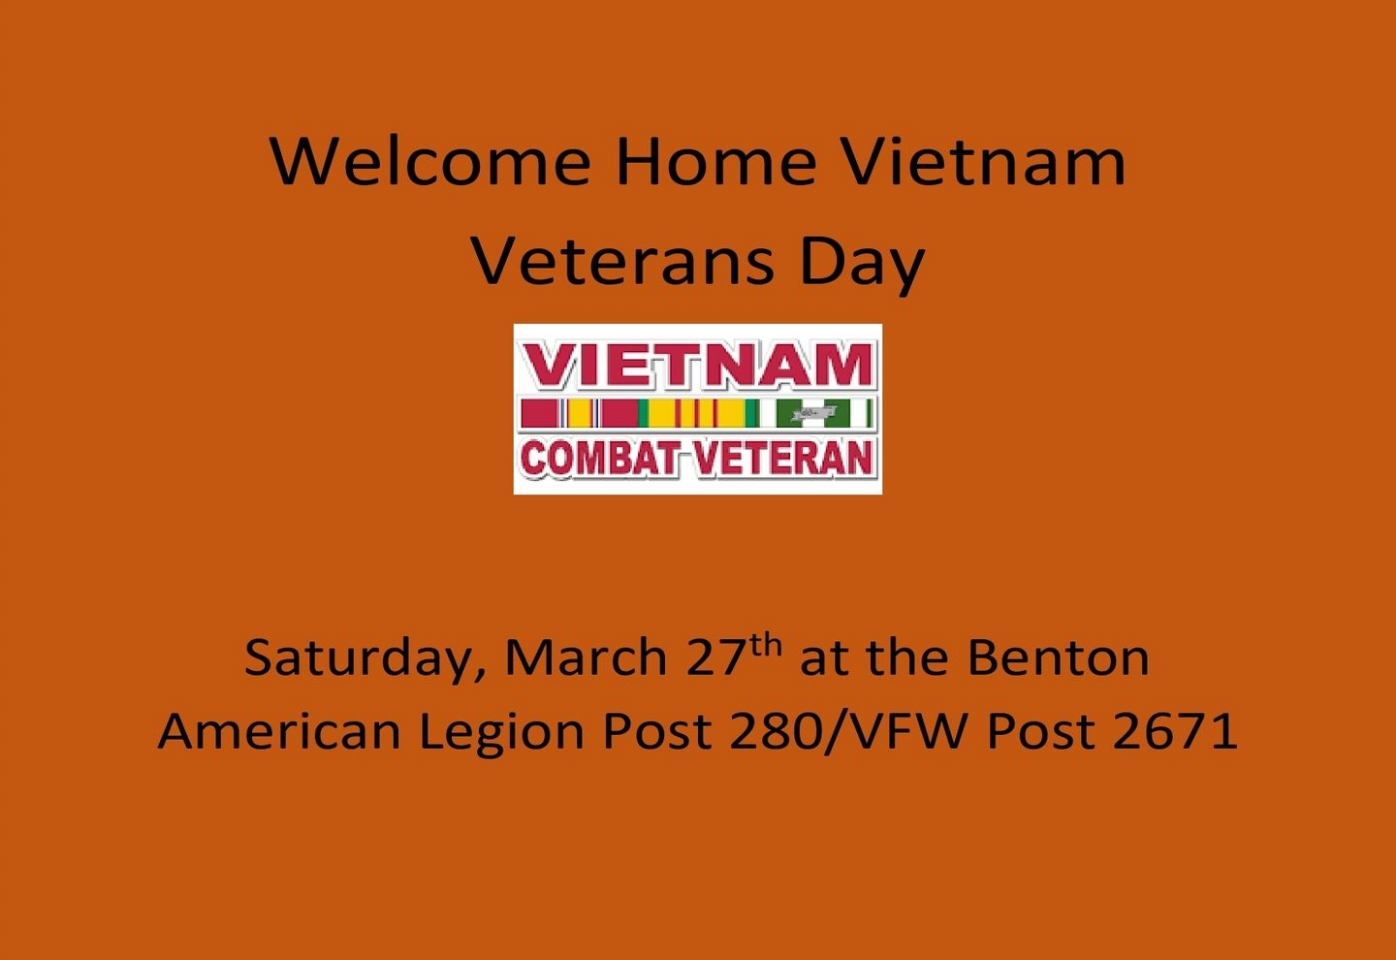 Welcome Home Vietnam Veterans Day Event 1 2021